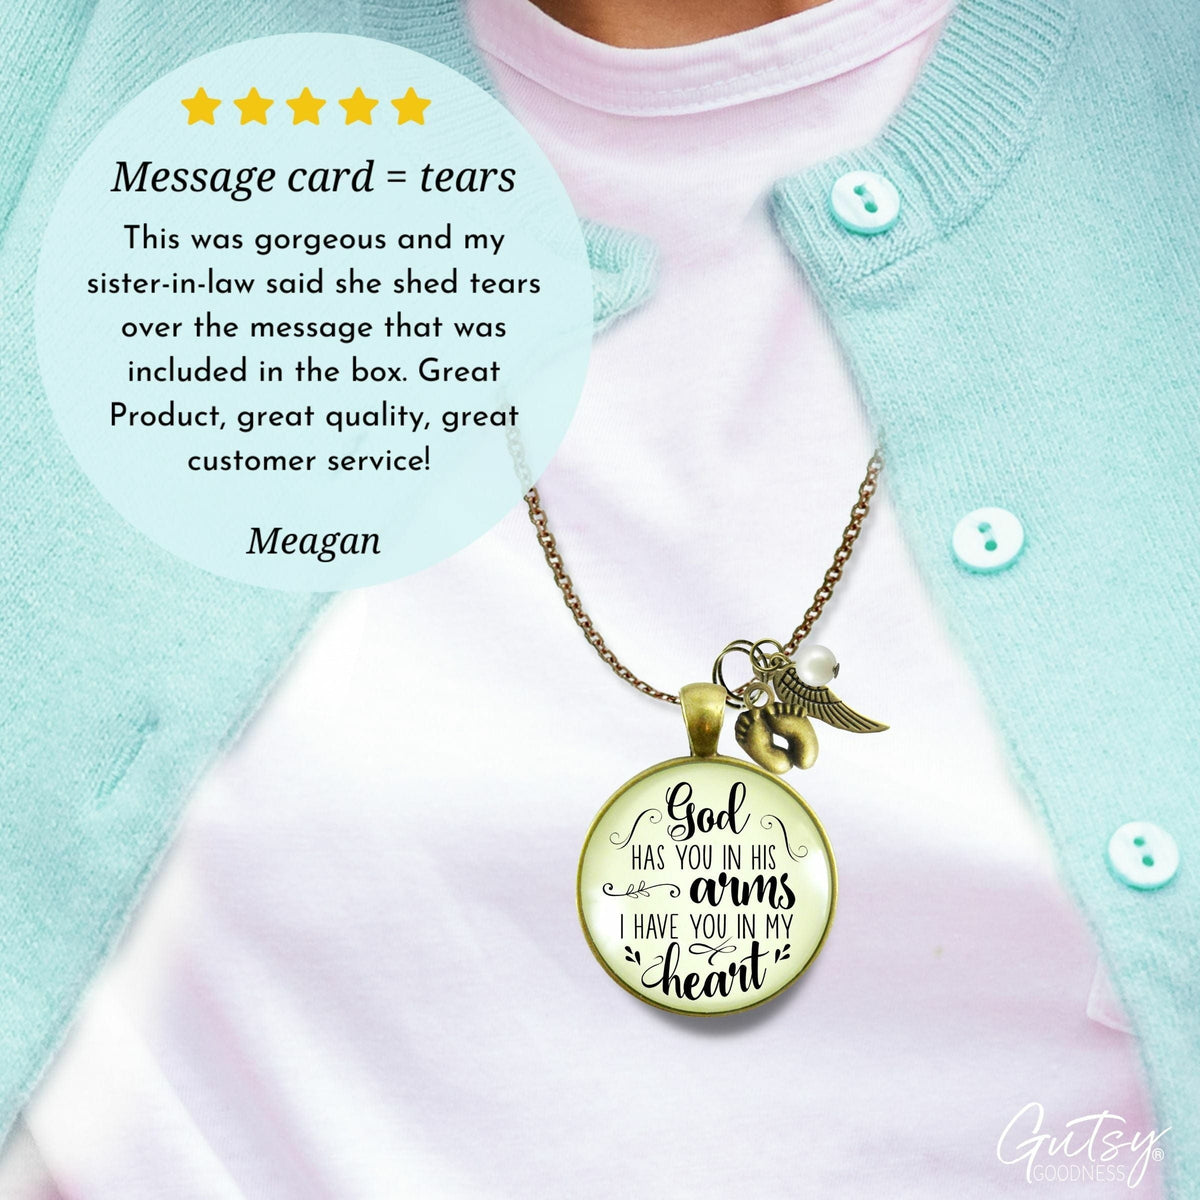 Gutsy Goodness Baby Loss Memorial Necklace For Mom God Has You Arms Miscarriage Jewelry Gift - Gutsy Goodness;Baby Loss Memorial Necklace For Mom God Has You Arms Miscarriage Jewelry Gift - Gutsy Goodness Handmade Jewelry Gifts